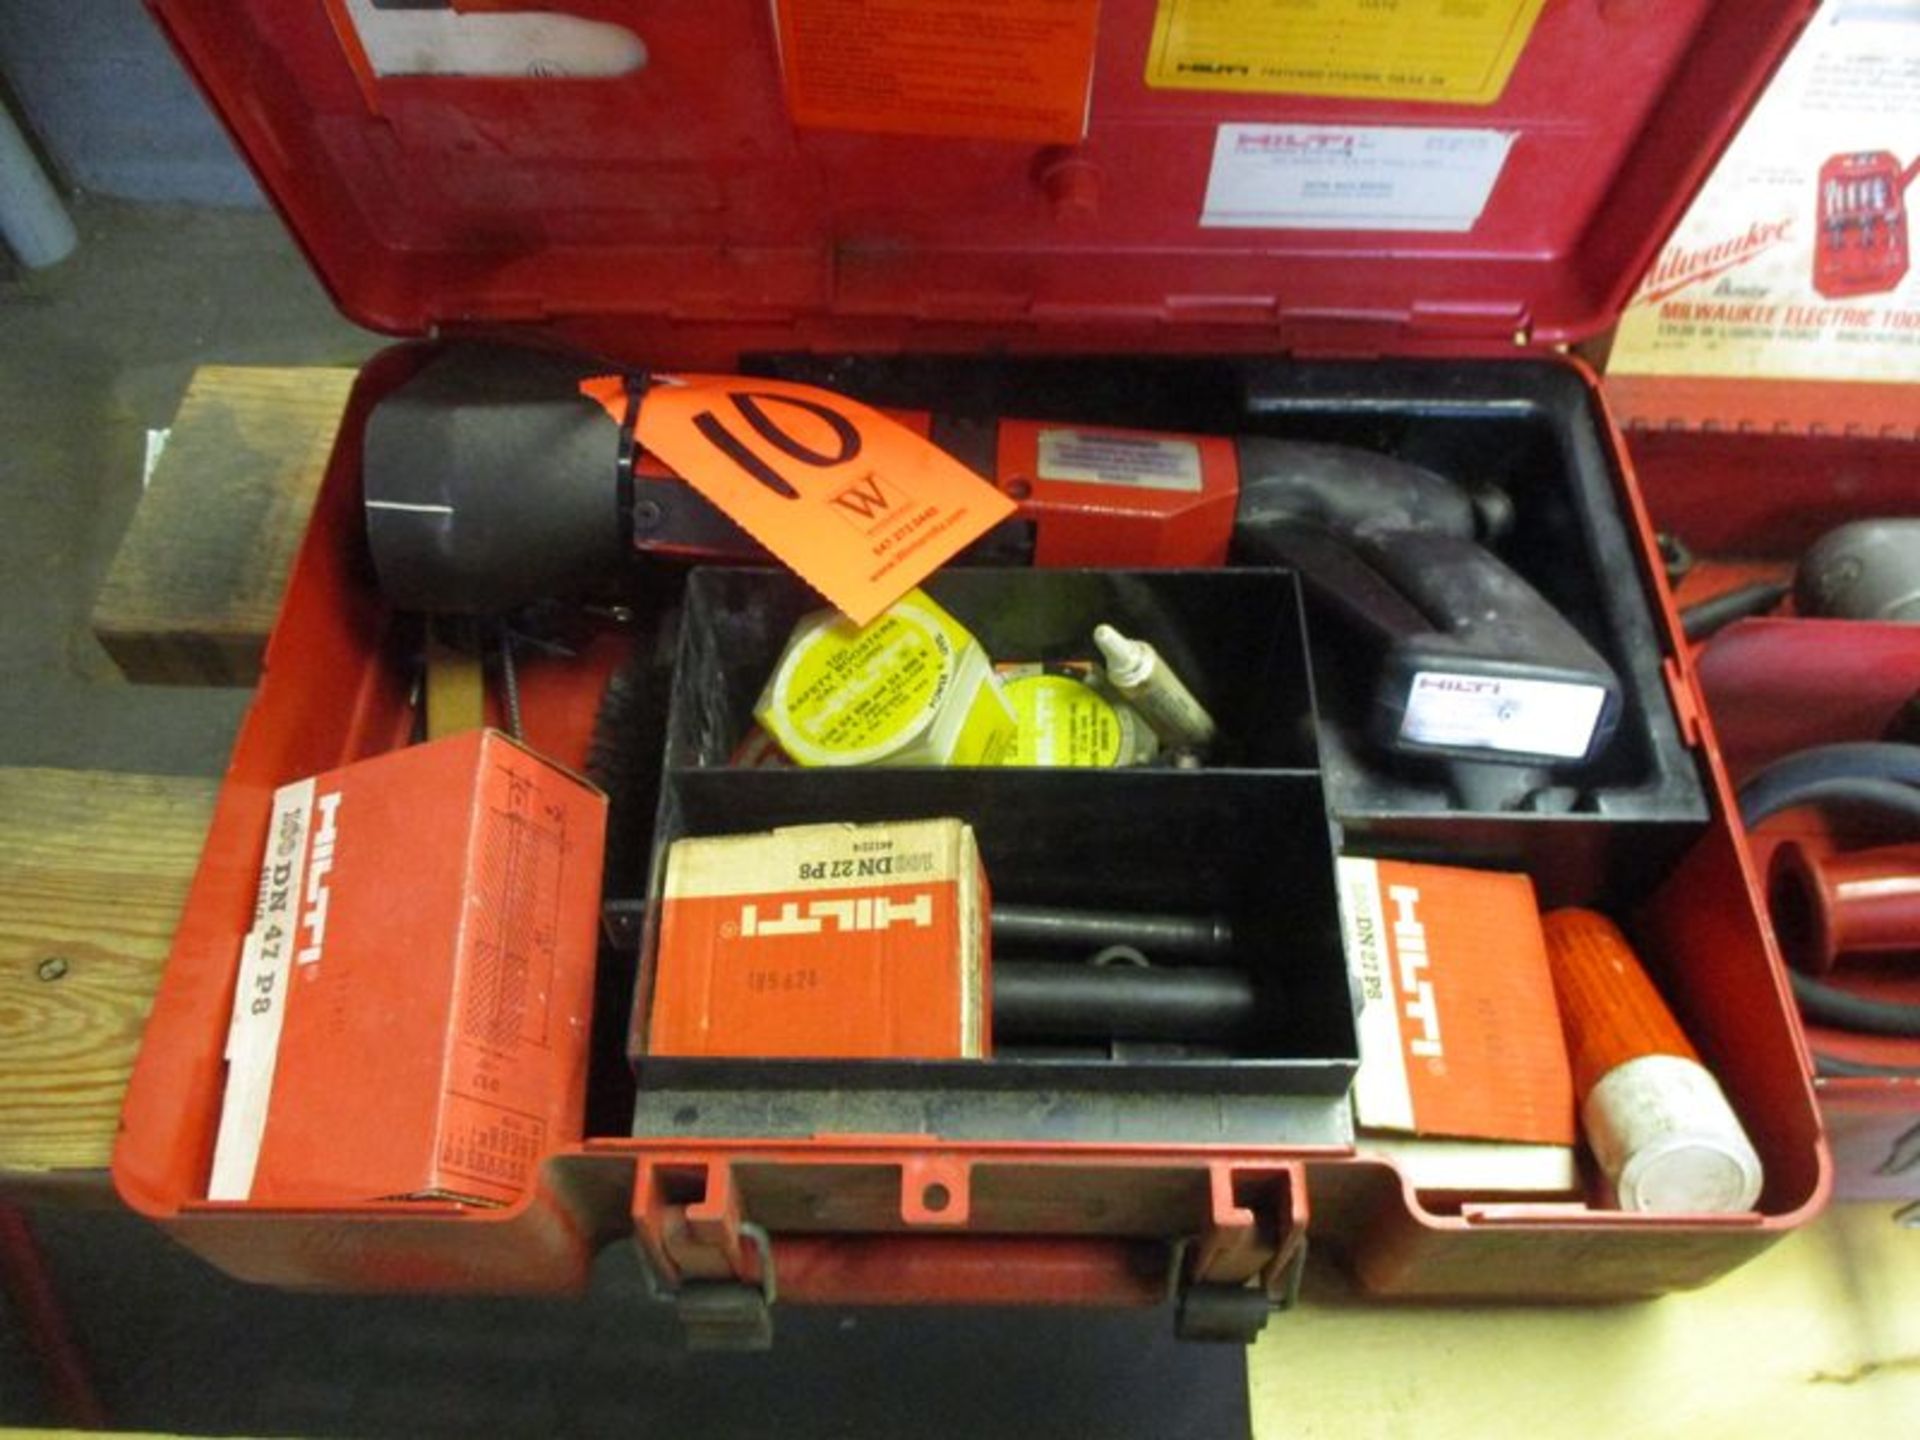 Hilti Model DX600N Heavy Duty Powder Actuated Nail & Stud Gun; with Case